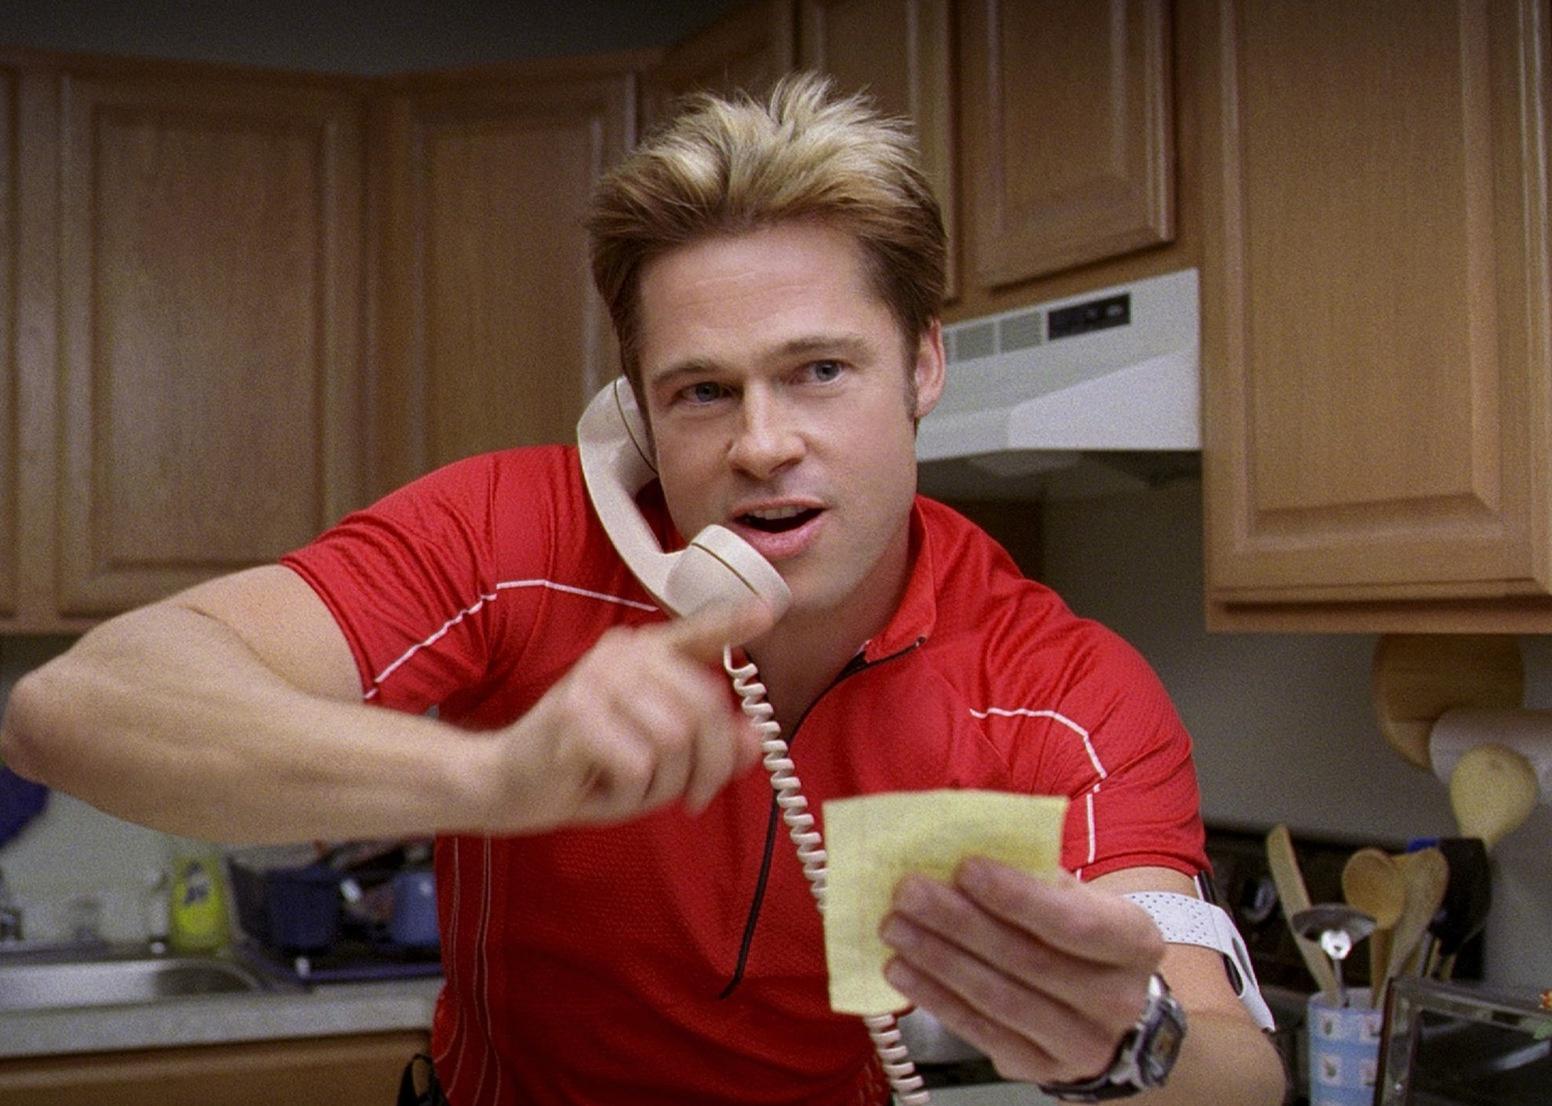 Brad Pitt in a red track suit talking energetically on the phone.